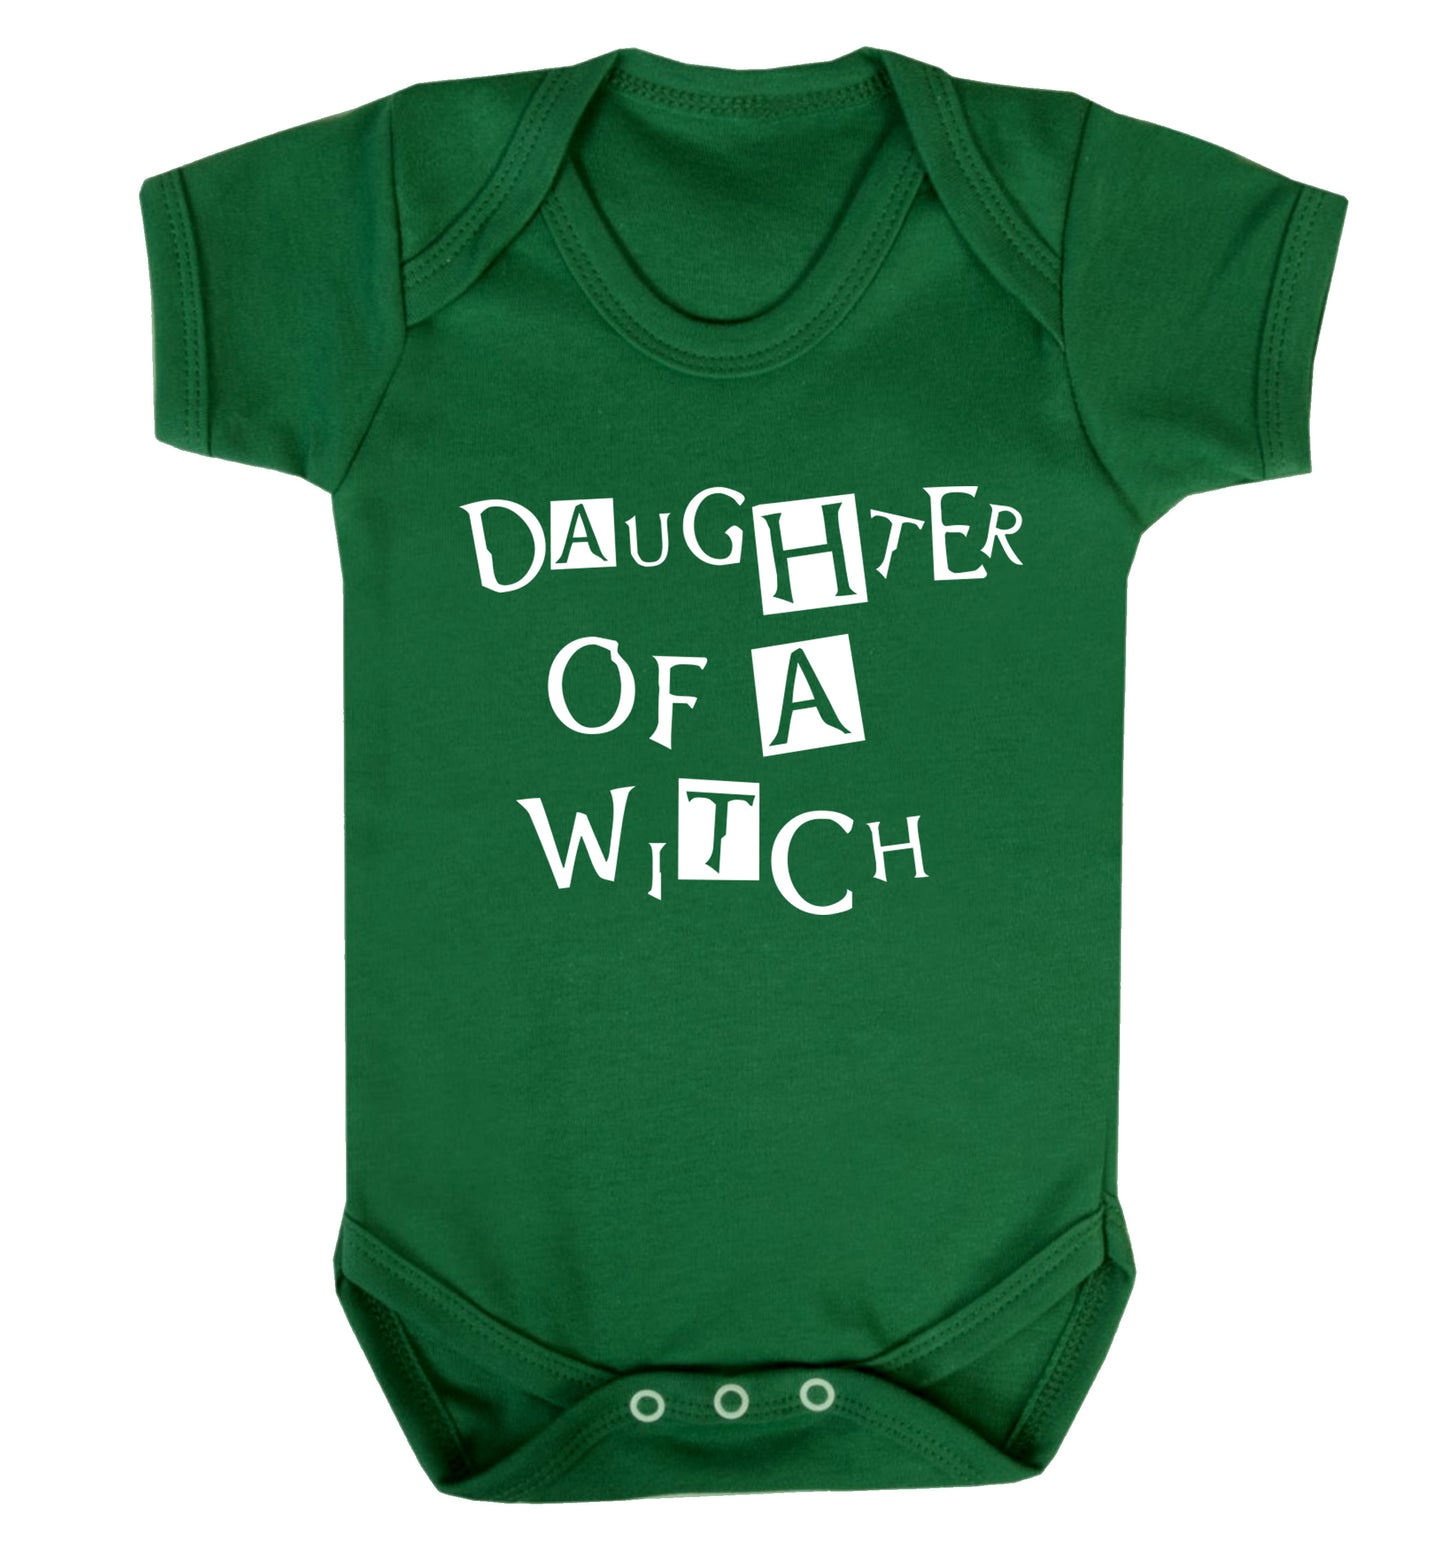 Daughter of a witch Baby Vest green 18-24 months